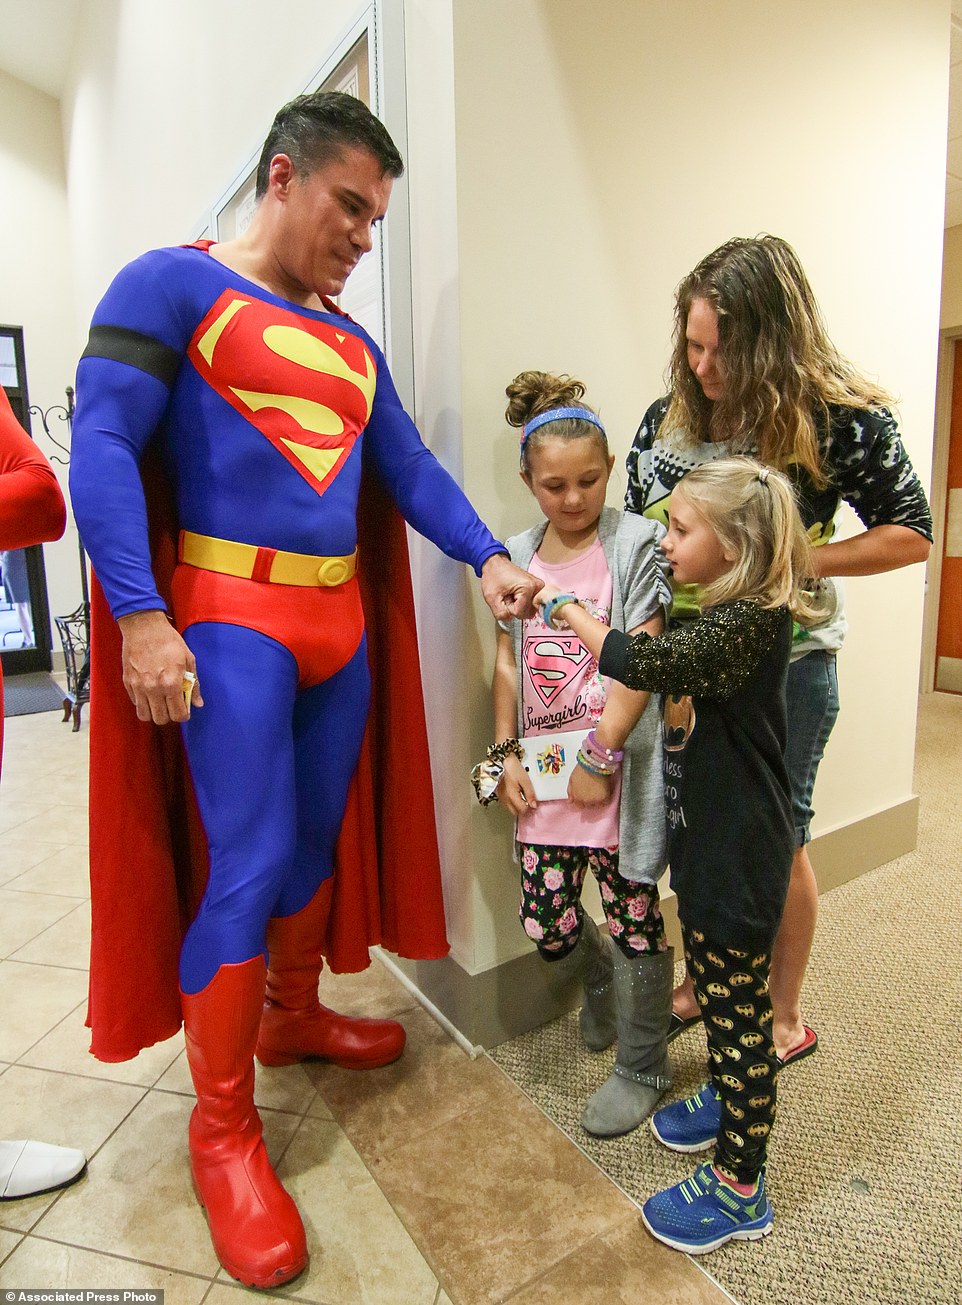 Zowie Sanders, gives a fist bump to John Suber, left, of Greenville, dressed as Superman, with her sister Lindsey Sanders, center, and their mother Brooke Starks, right, of Townville, during a wake service for Jacob Hall